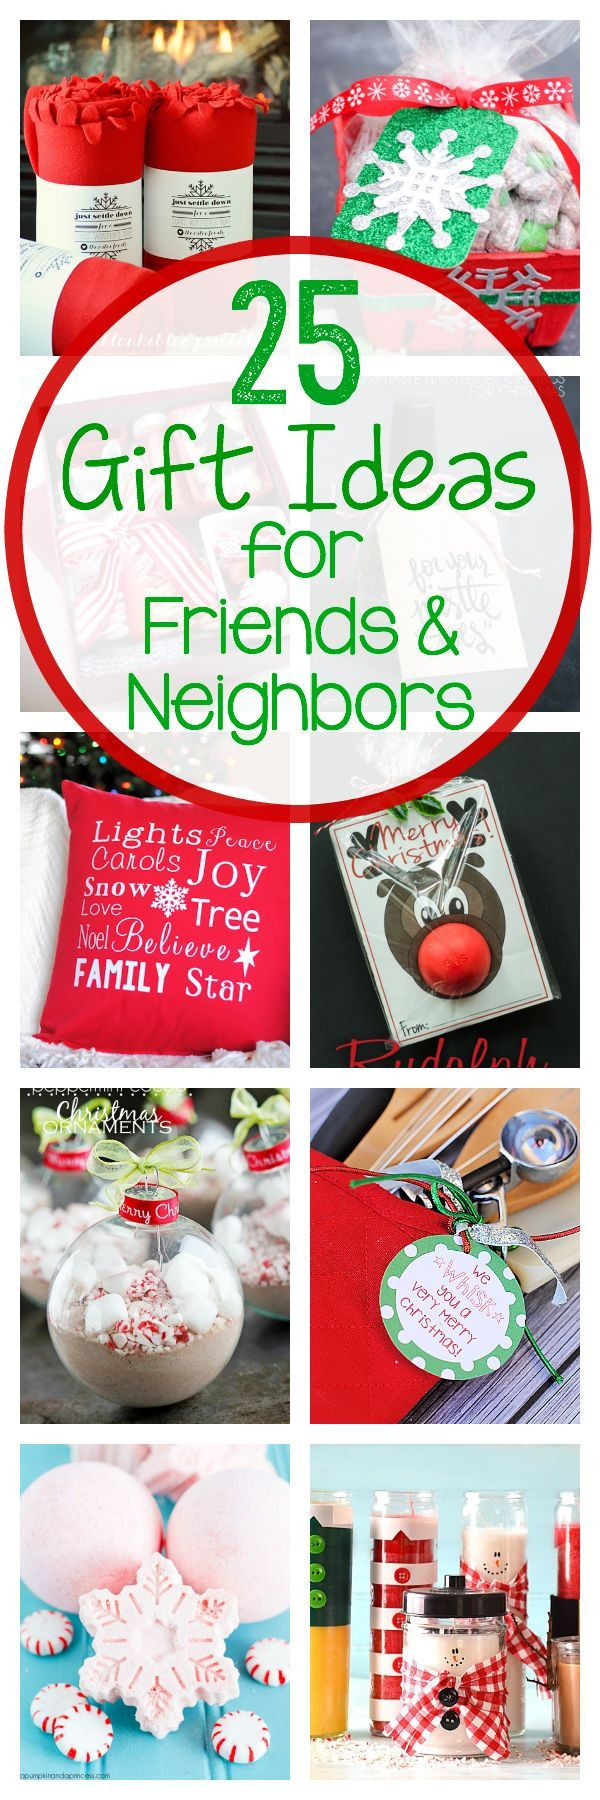 Holiday Gift Ideas For Friends
 43 best images about Gift Ideas Christmas on Pinterest